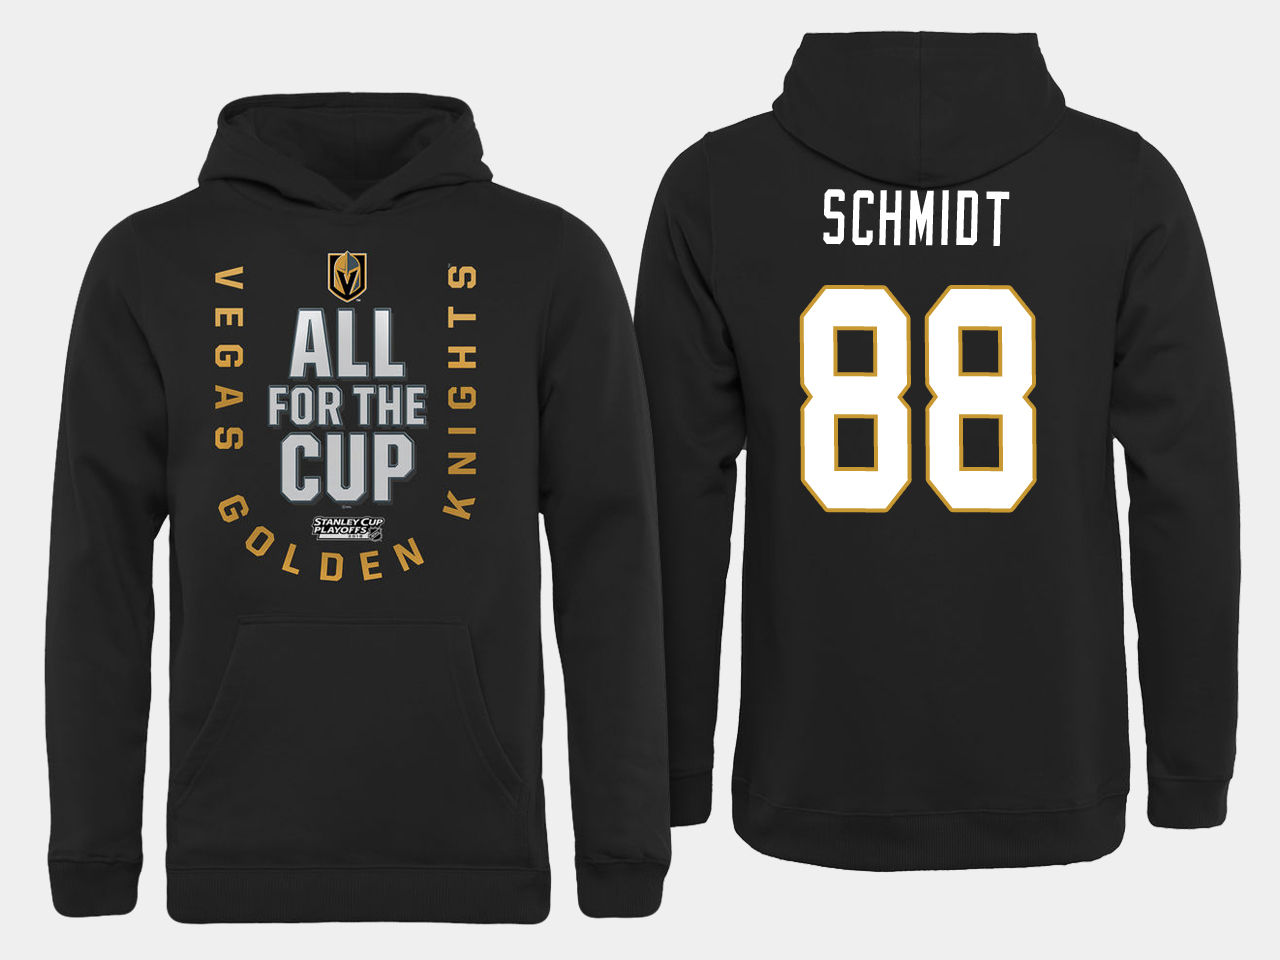 Men NHL Vegas Golden Knights 88 Schmidt All for the Cup hoodie